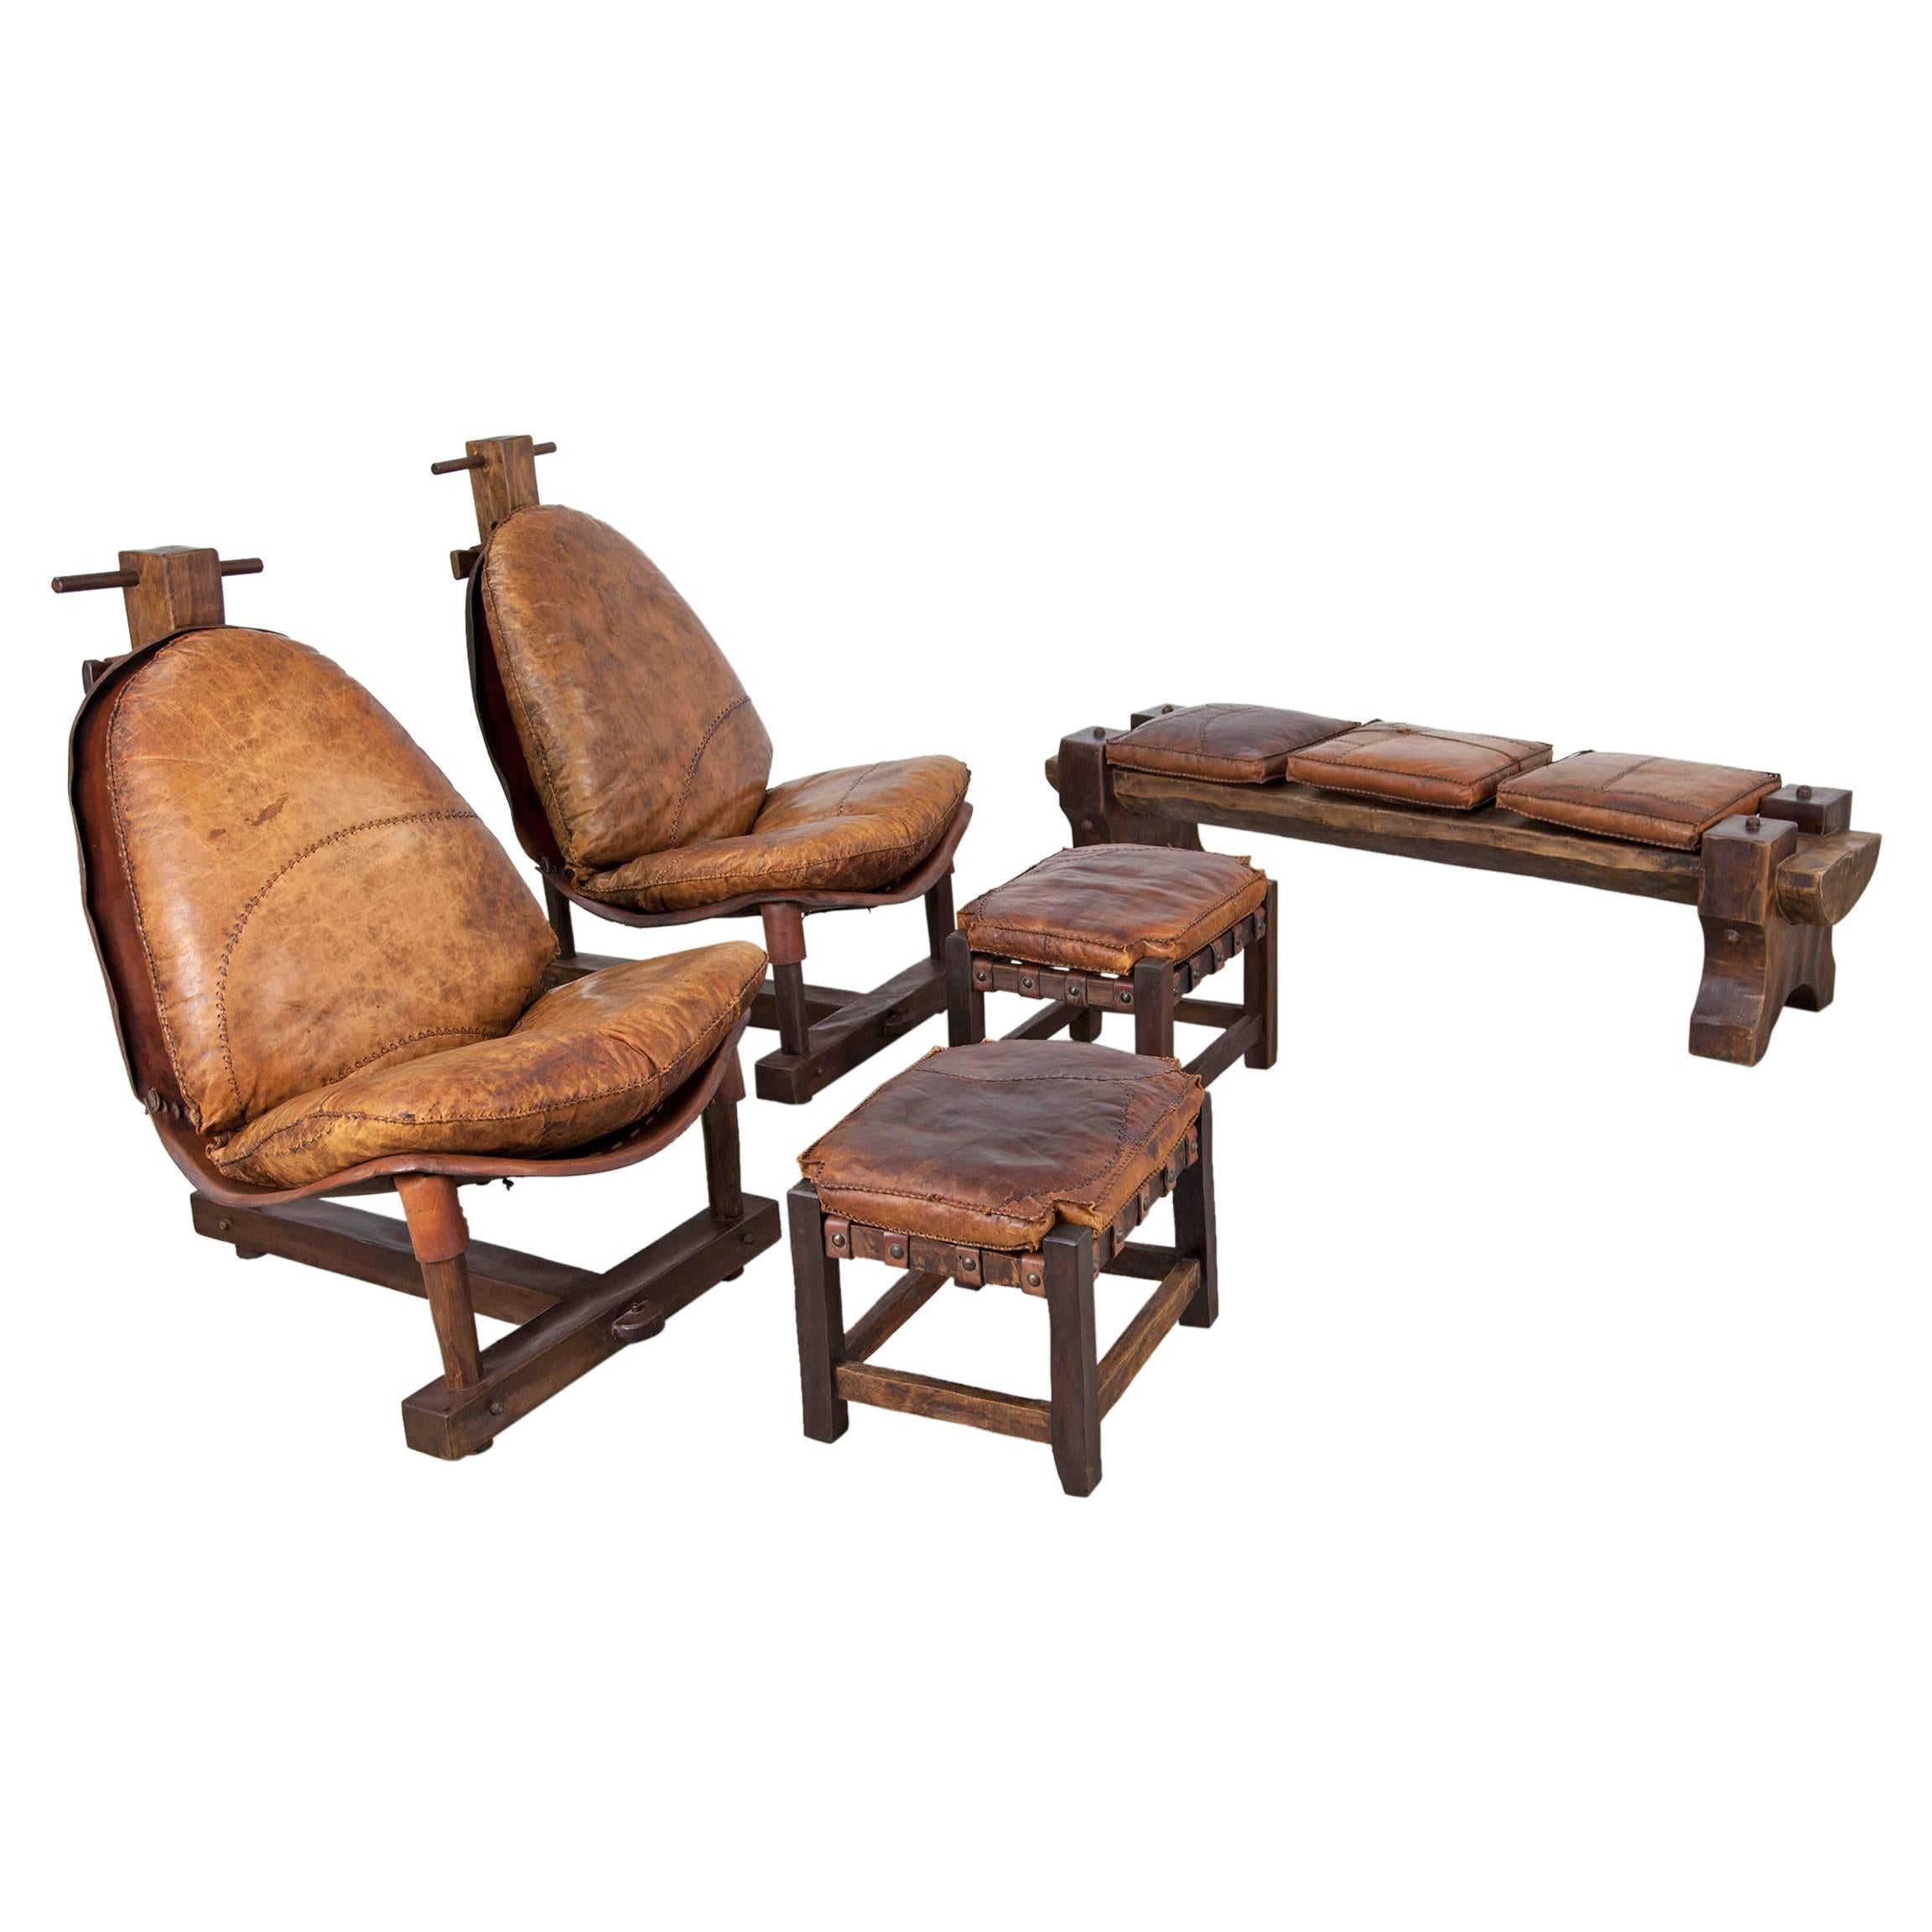 Extravagant Seating Group, Two Lounge Chairs with Ottomans and Bench, Rosewood For Sale